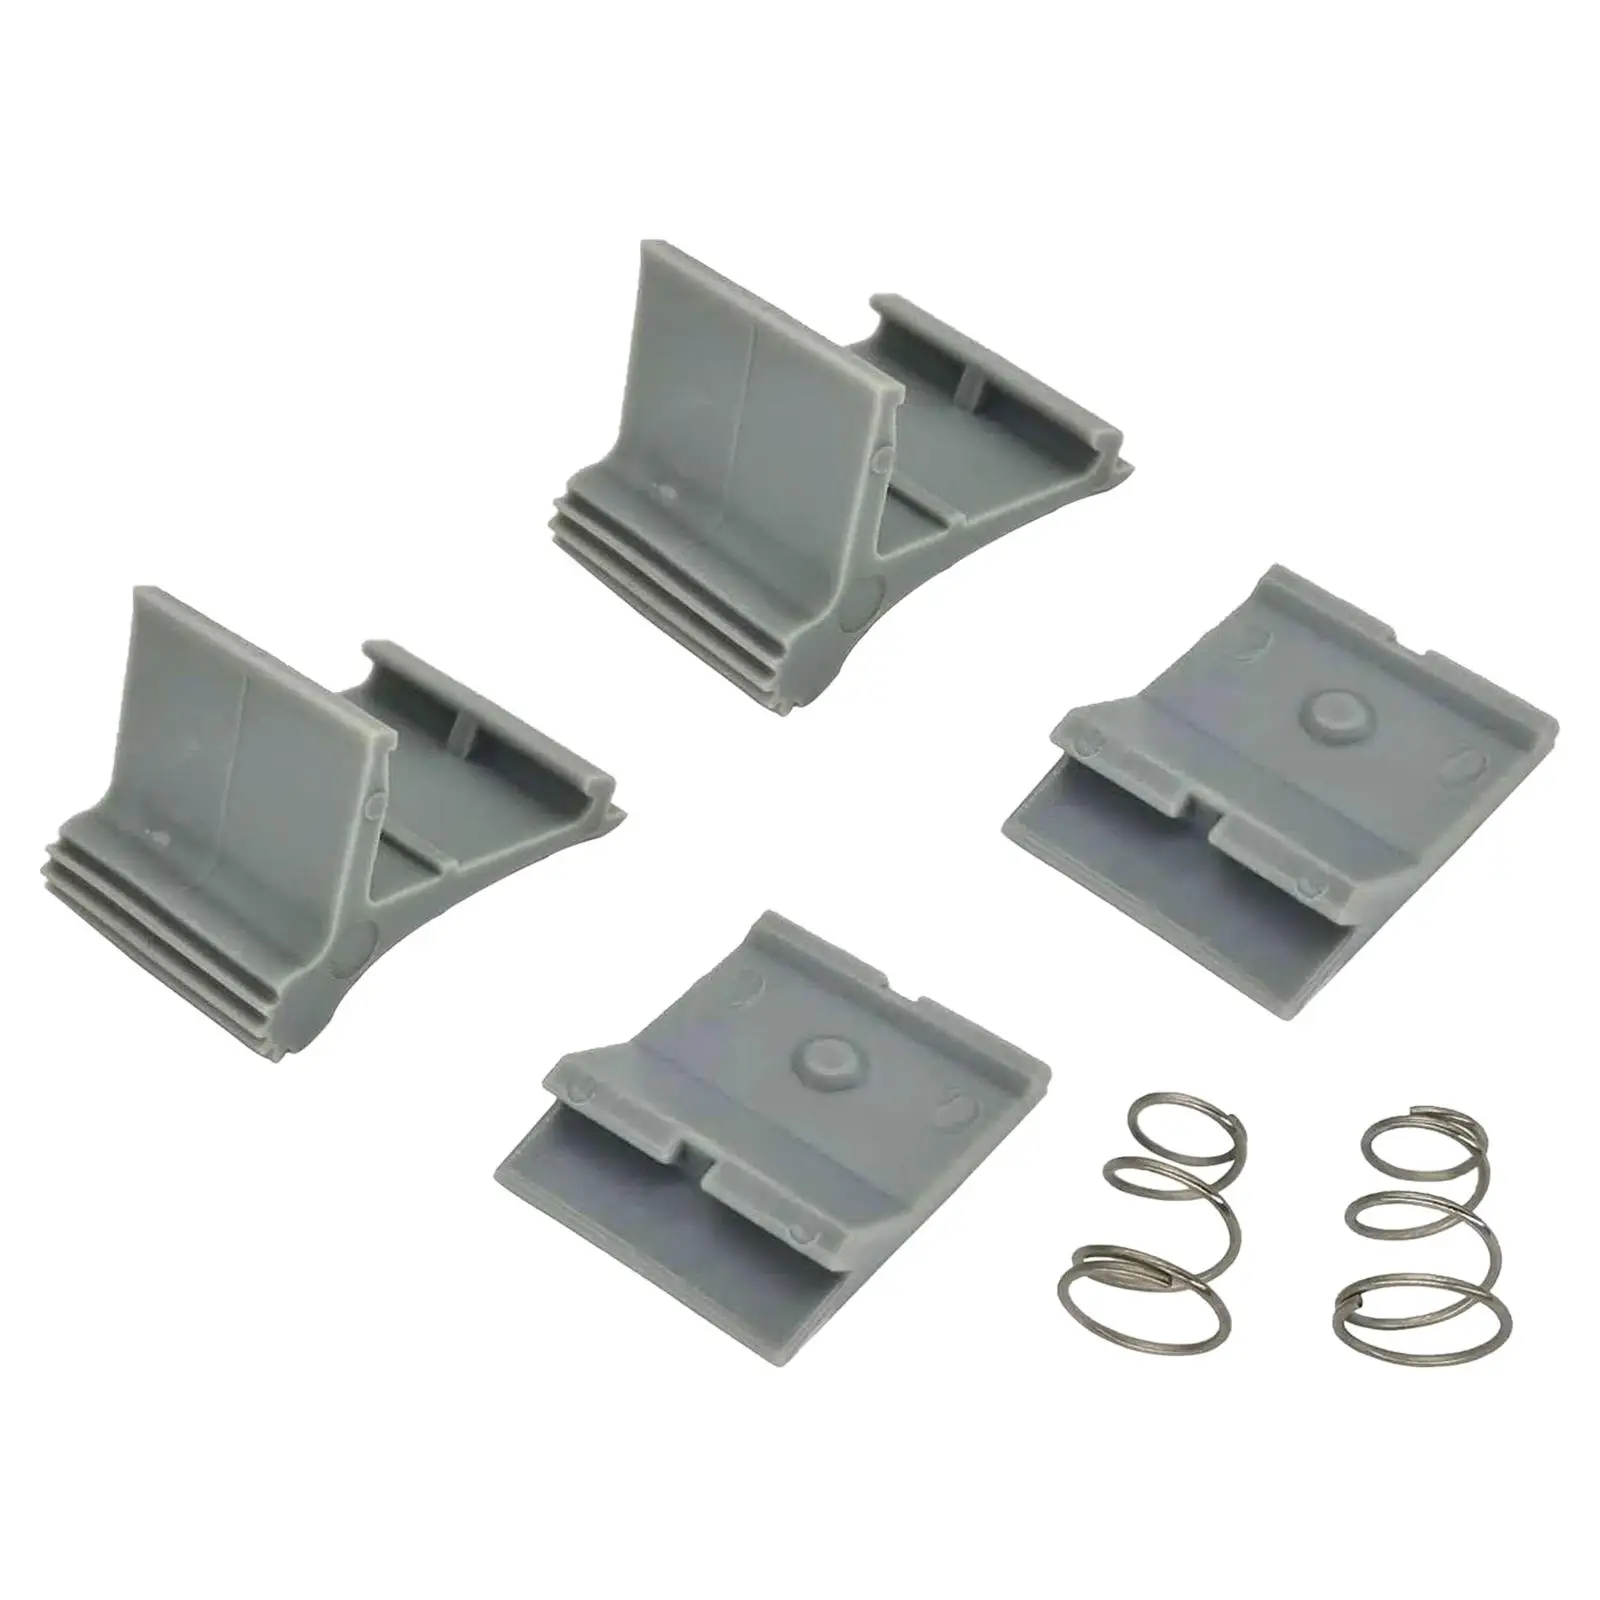 Awning Arm Slider Catch Set Spare Parts Accessory for Camper Motorhome